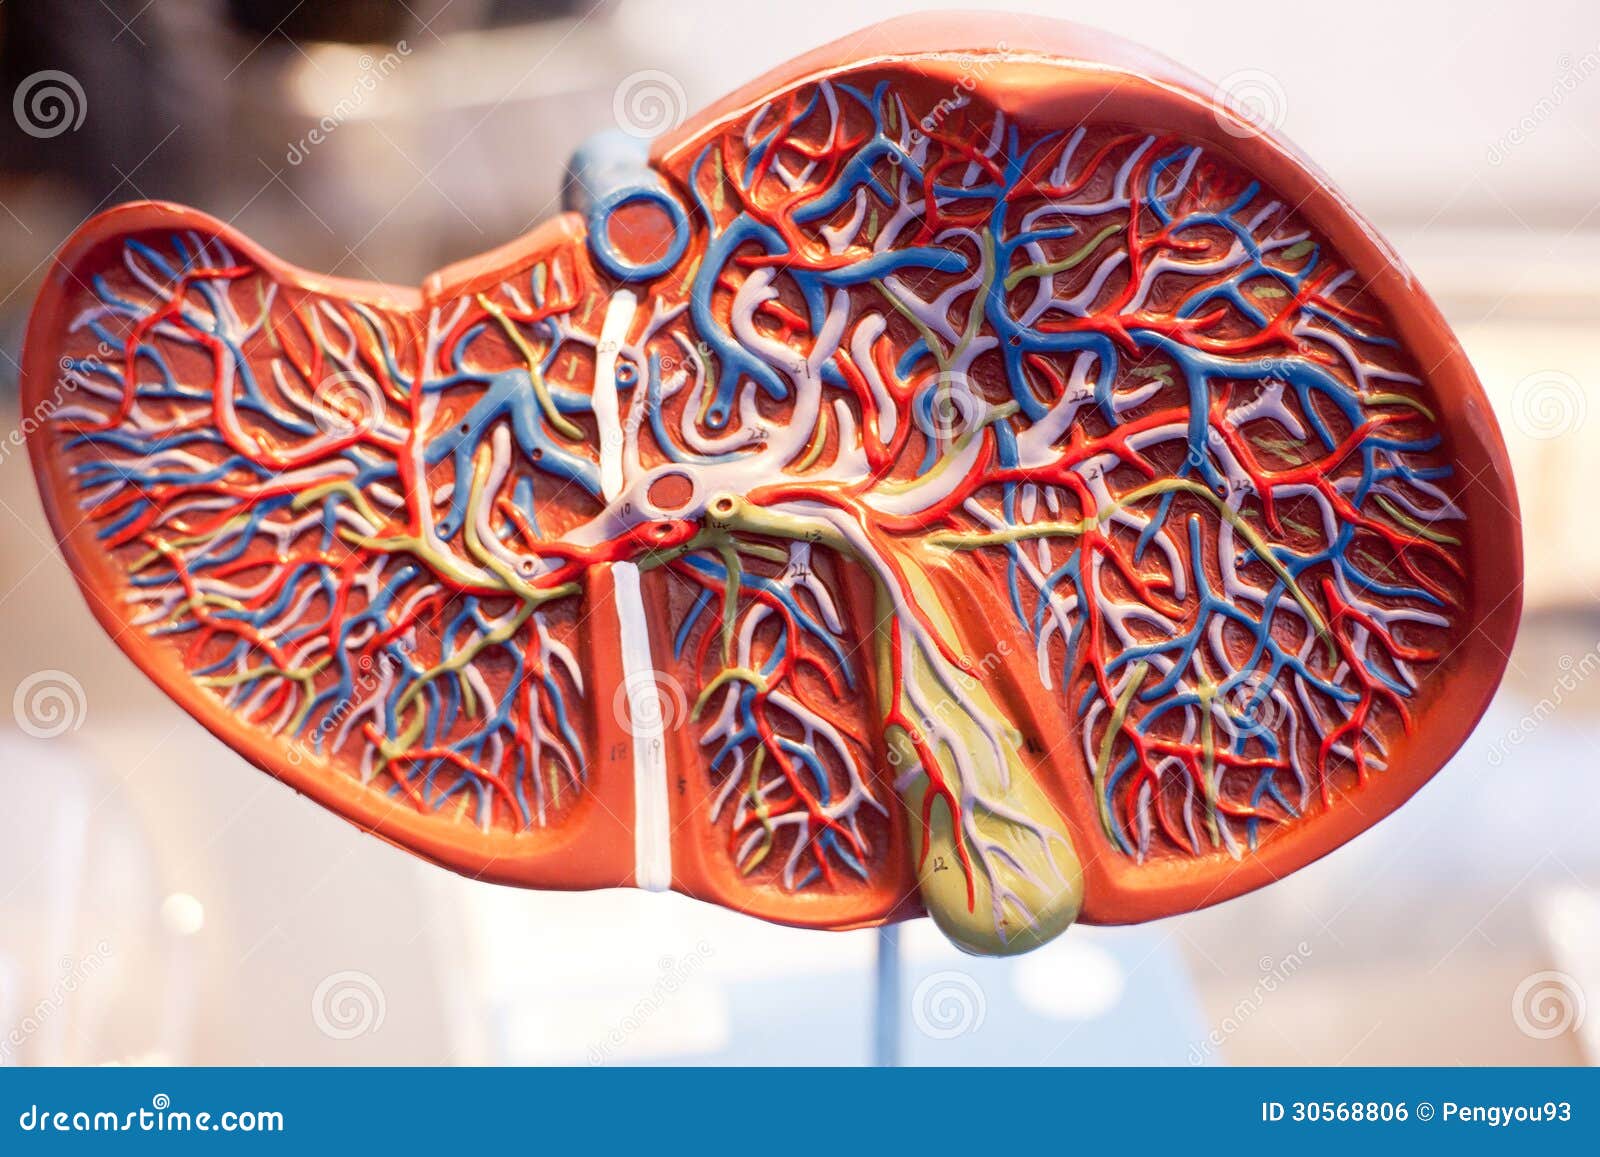 Model Of Human Organs The Liver Royalty Free Stock Image Image 30568806